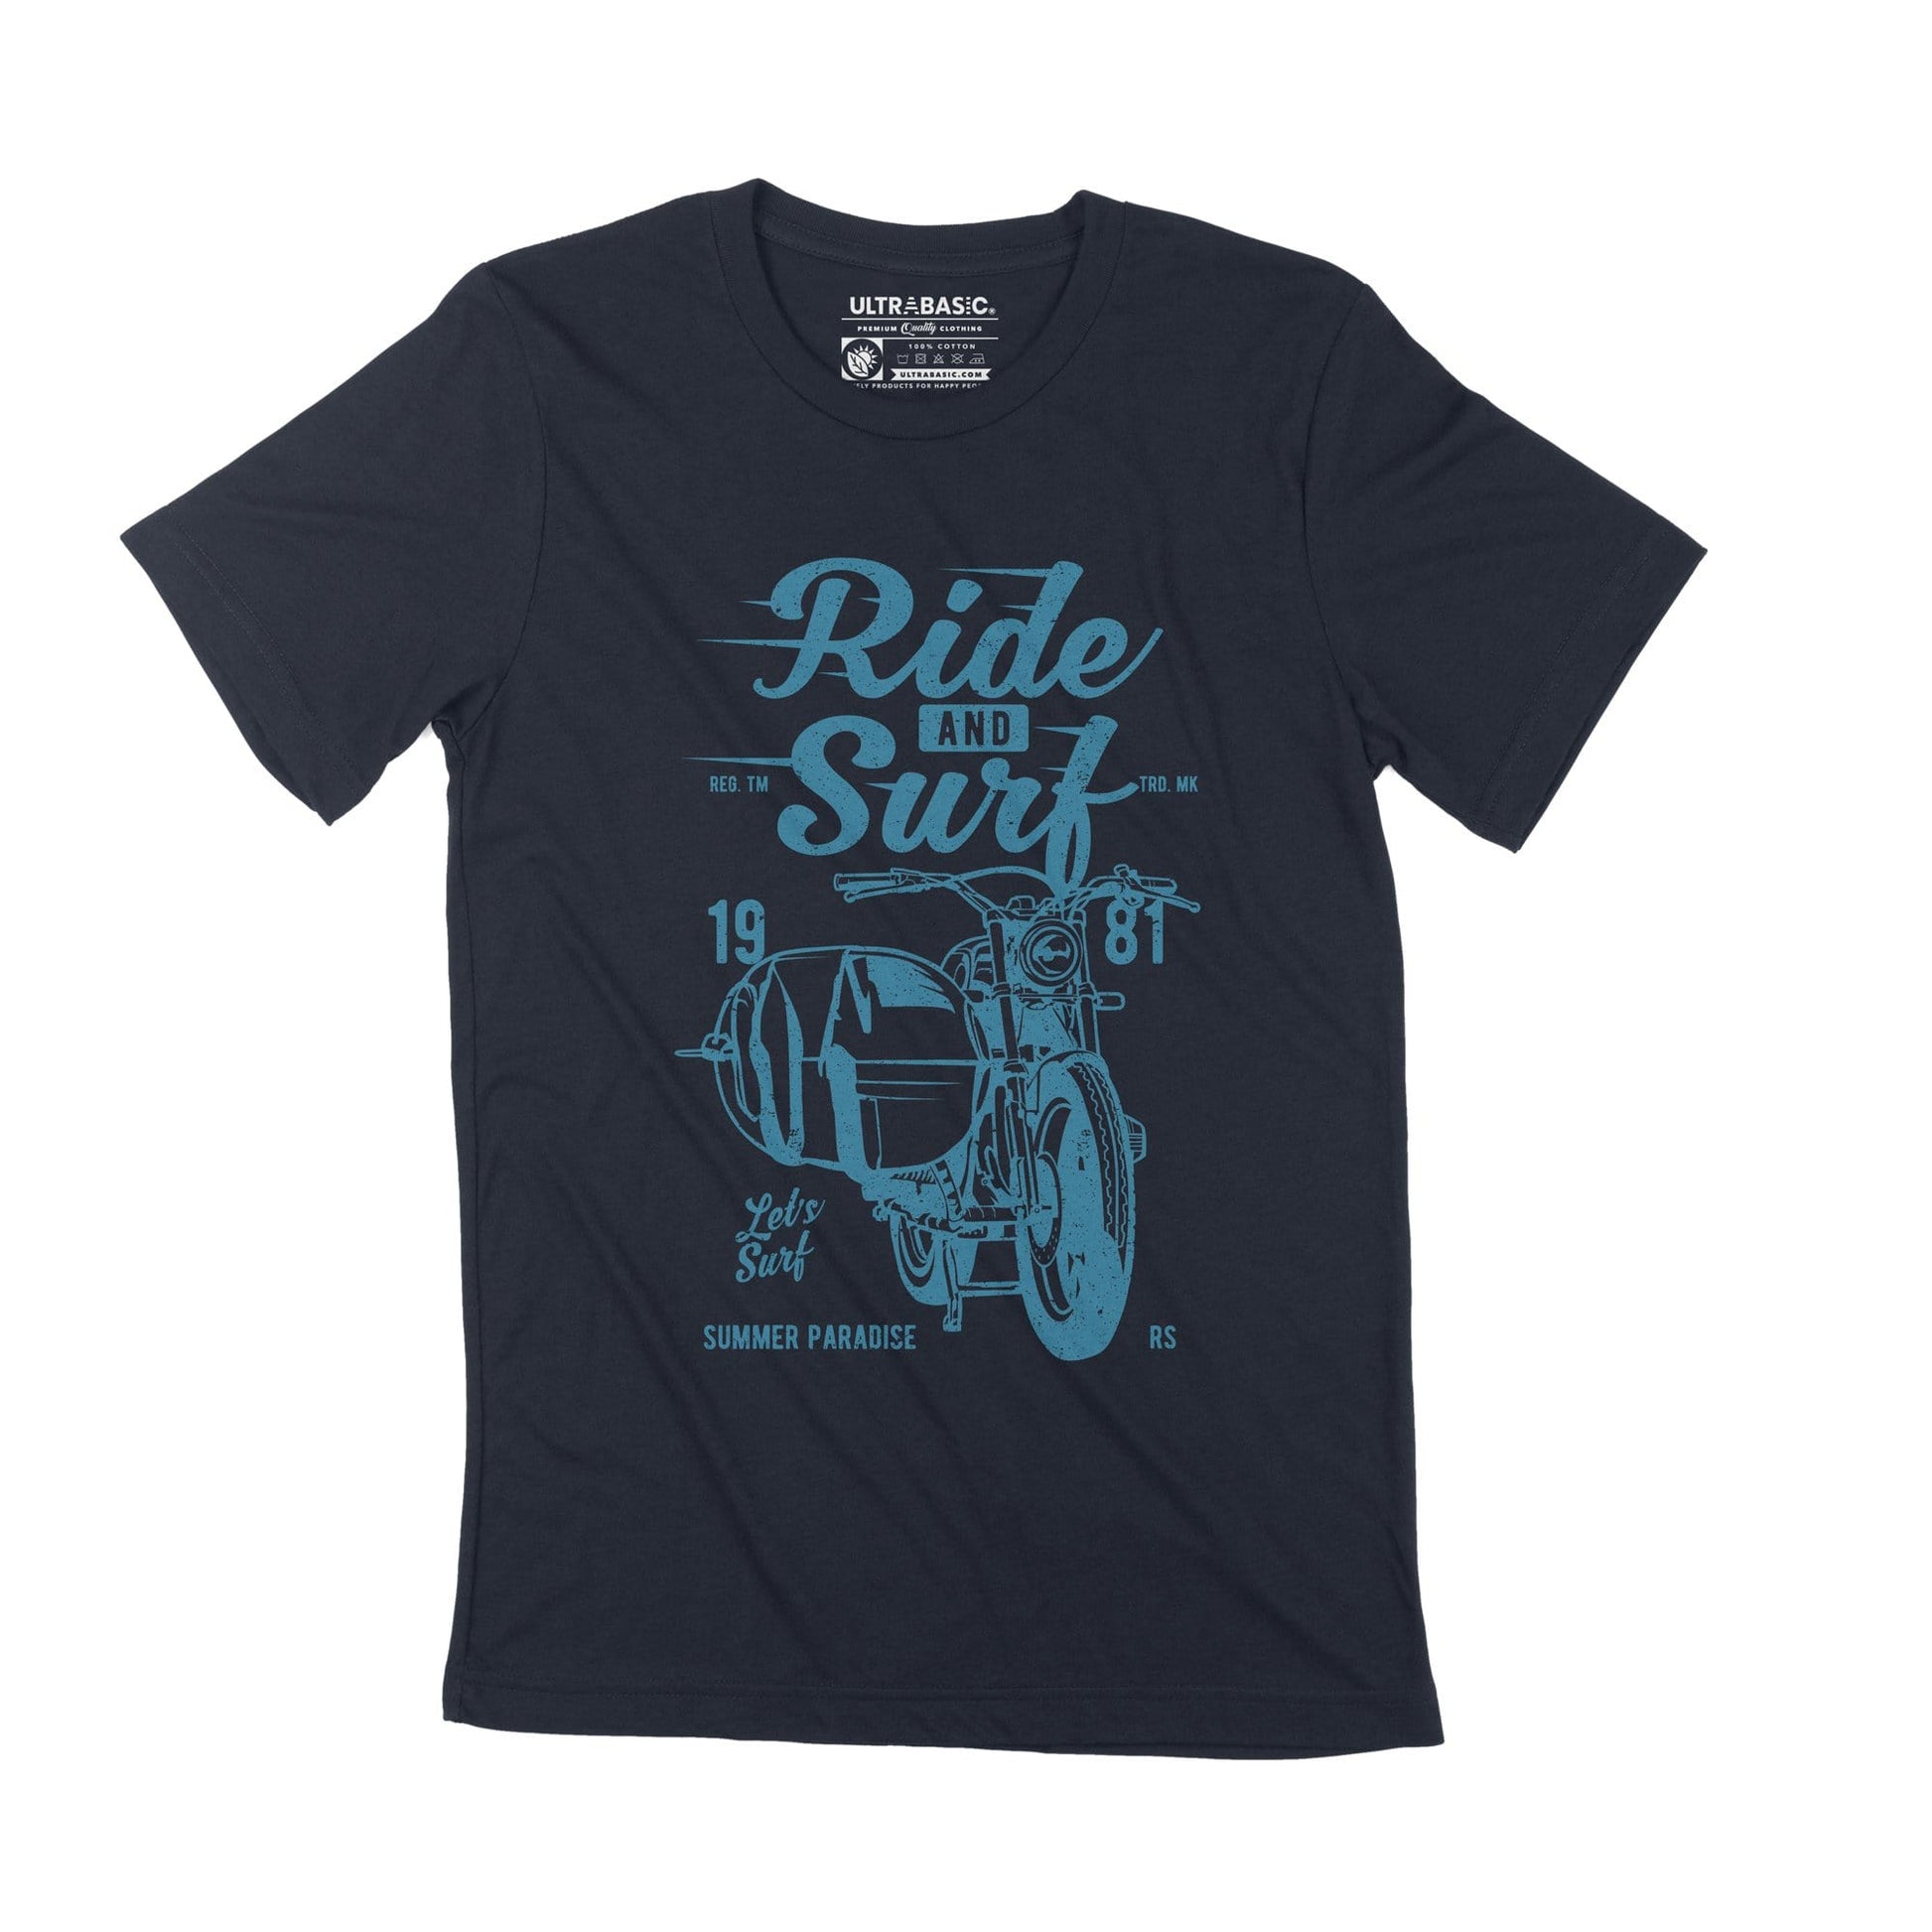 ULTRABASIC Vintage Motorcycle Men's T-Shirts - Ride and Surf Summer 1981 Tee   good vibes beach ride moto oldtimer mechanic shirt slogan classic clothing men outdoor life fashion victory outfit usa guy apparel road unisex motorbike bike genuine motorcycles merchandise highway street fathers day christmas merch speed ideas